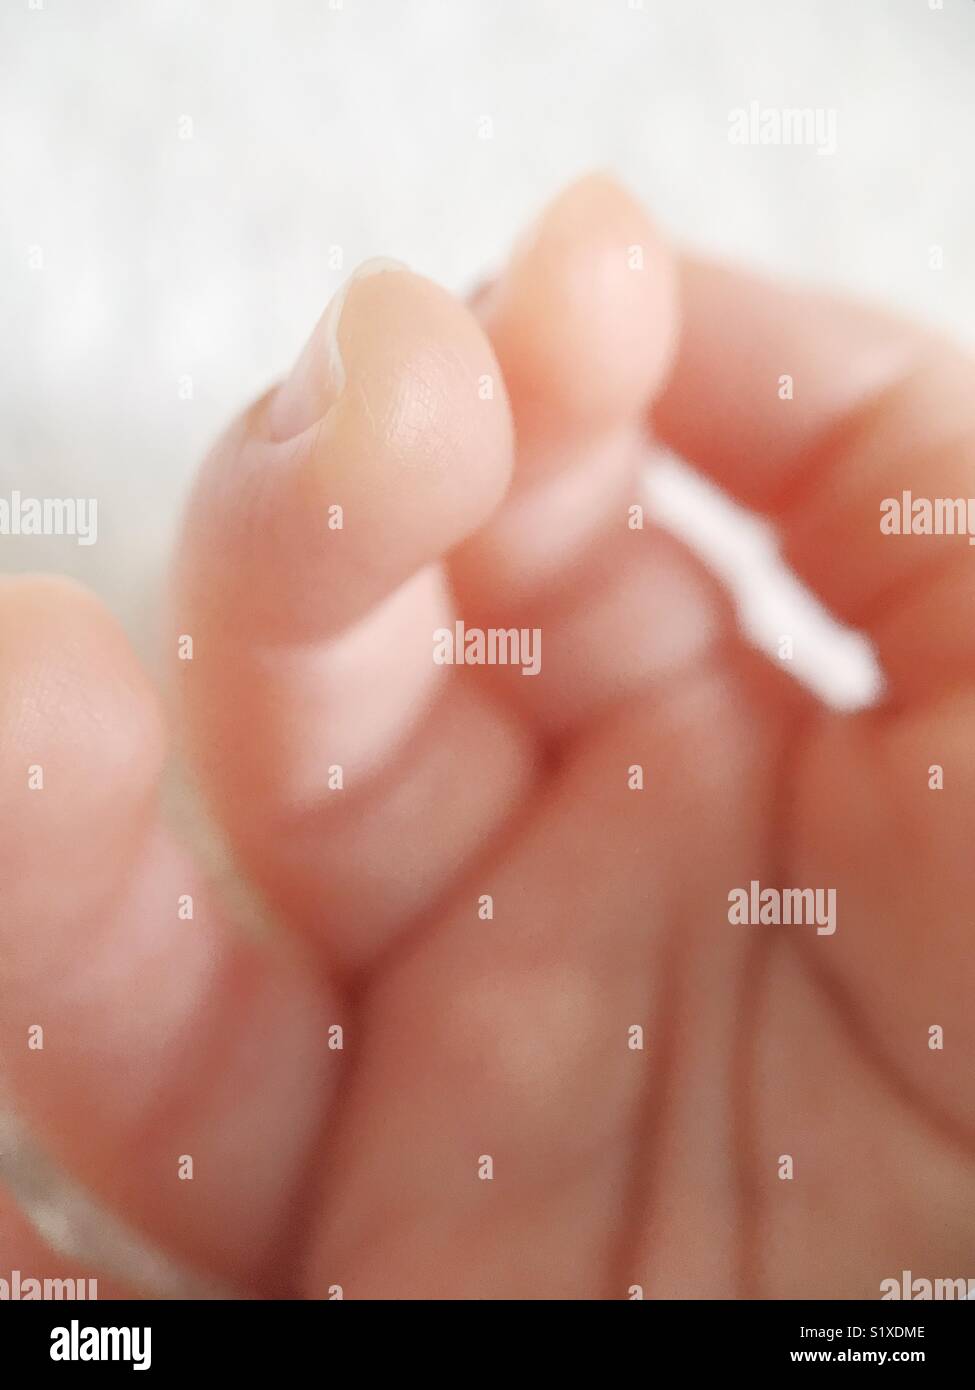 Macro photograph of a baby's fingers. Stock Photo